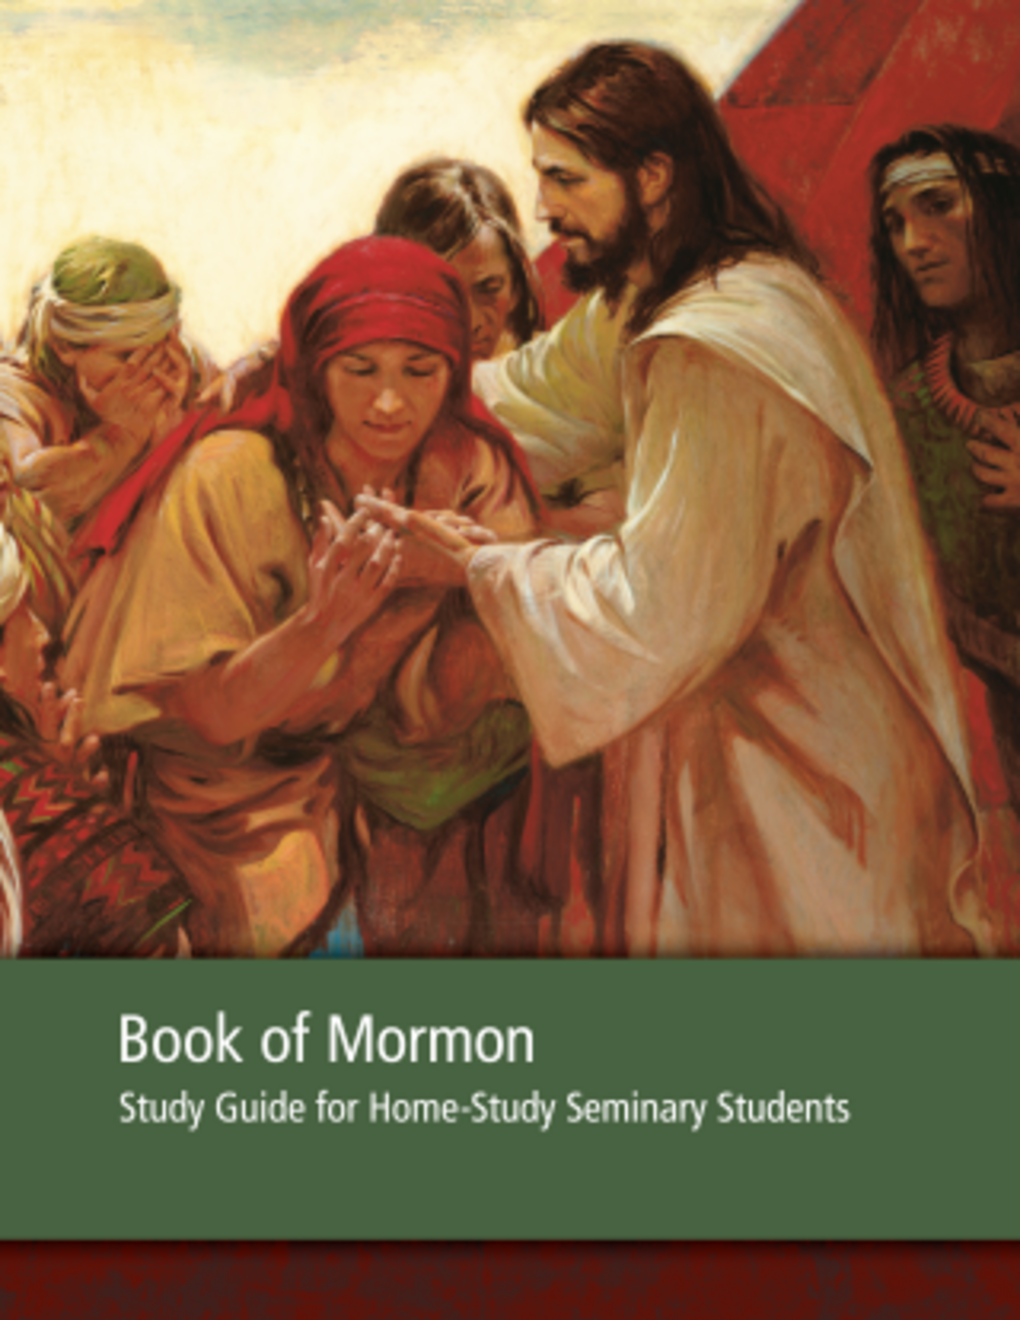 Book of Mormon Study Guide for Home-Study Seminary Students - 2013